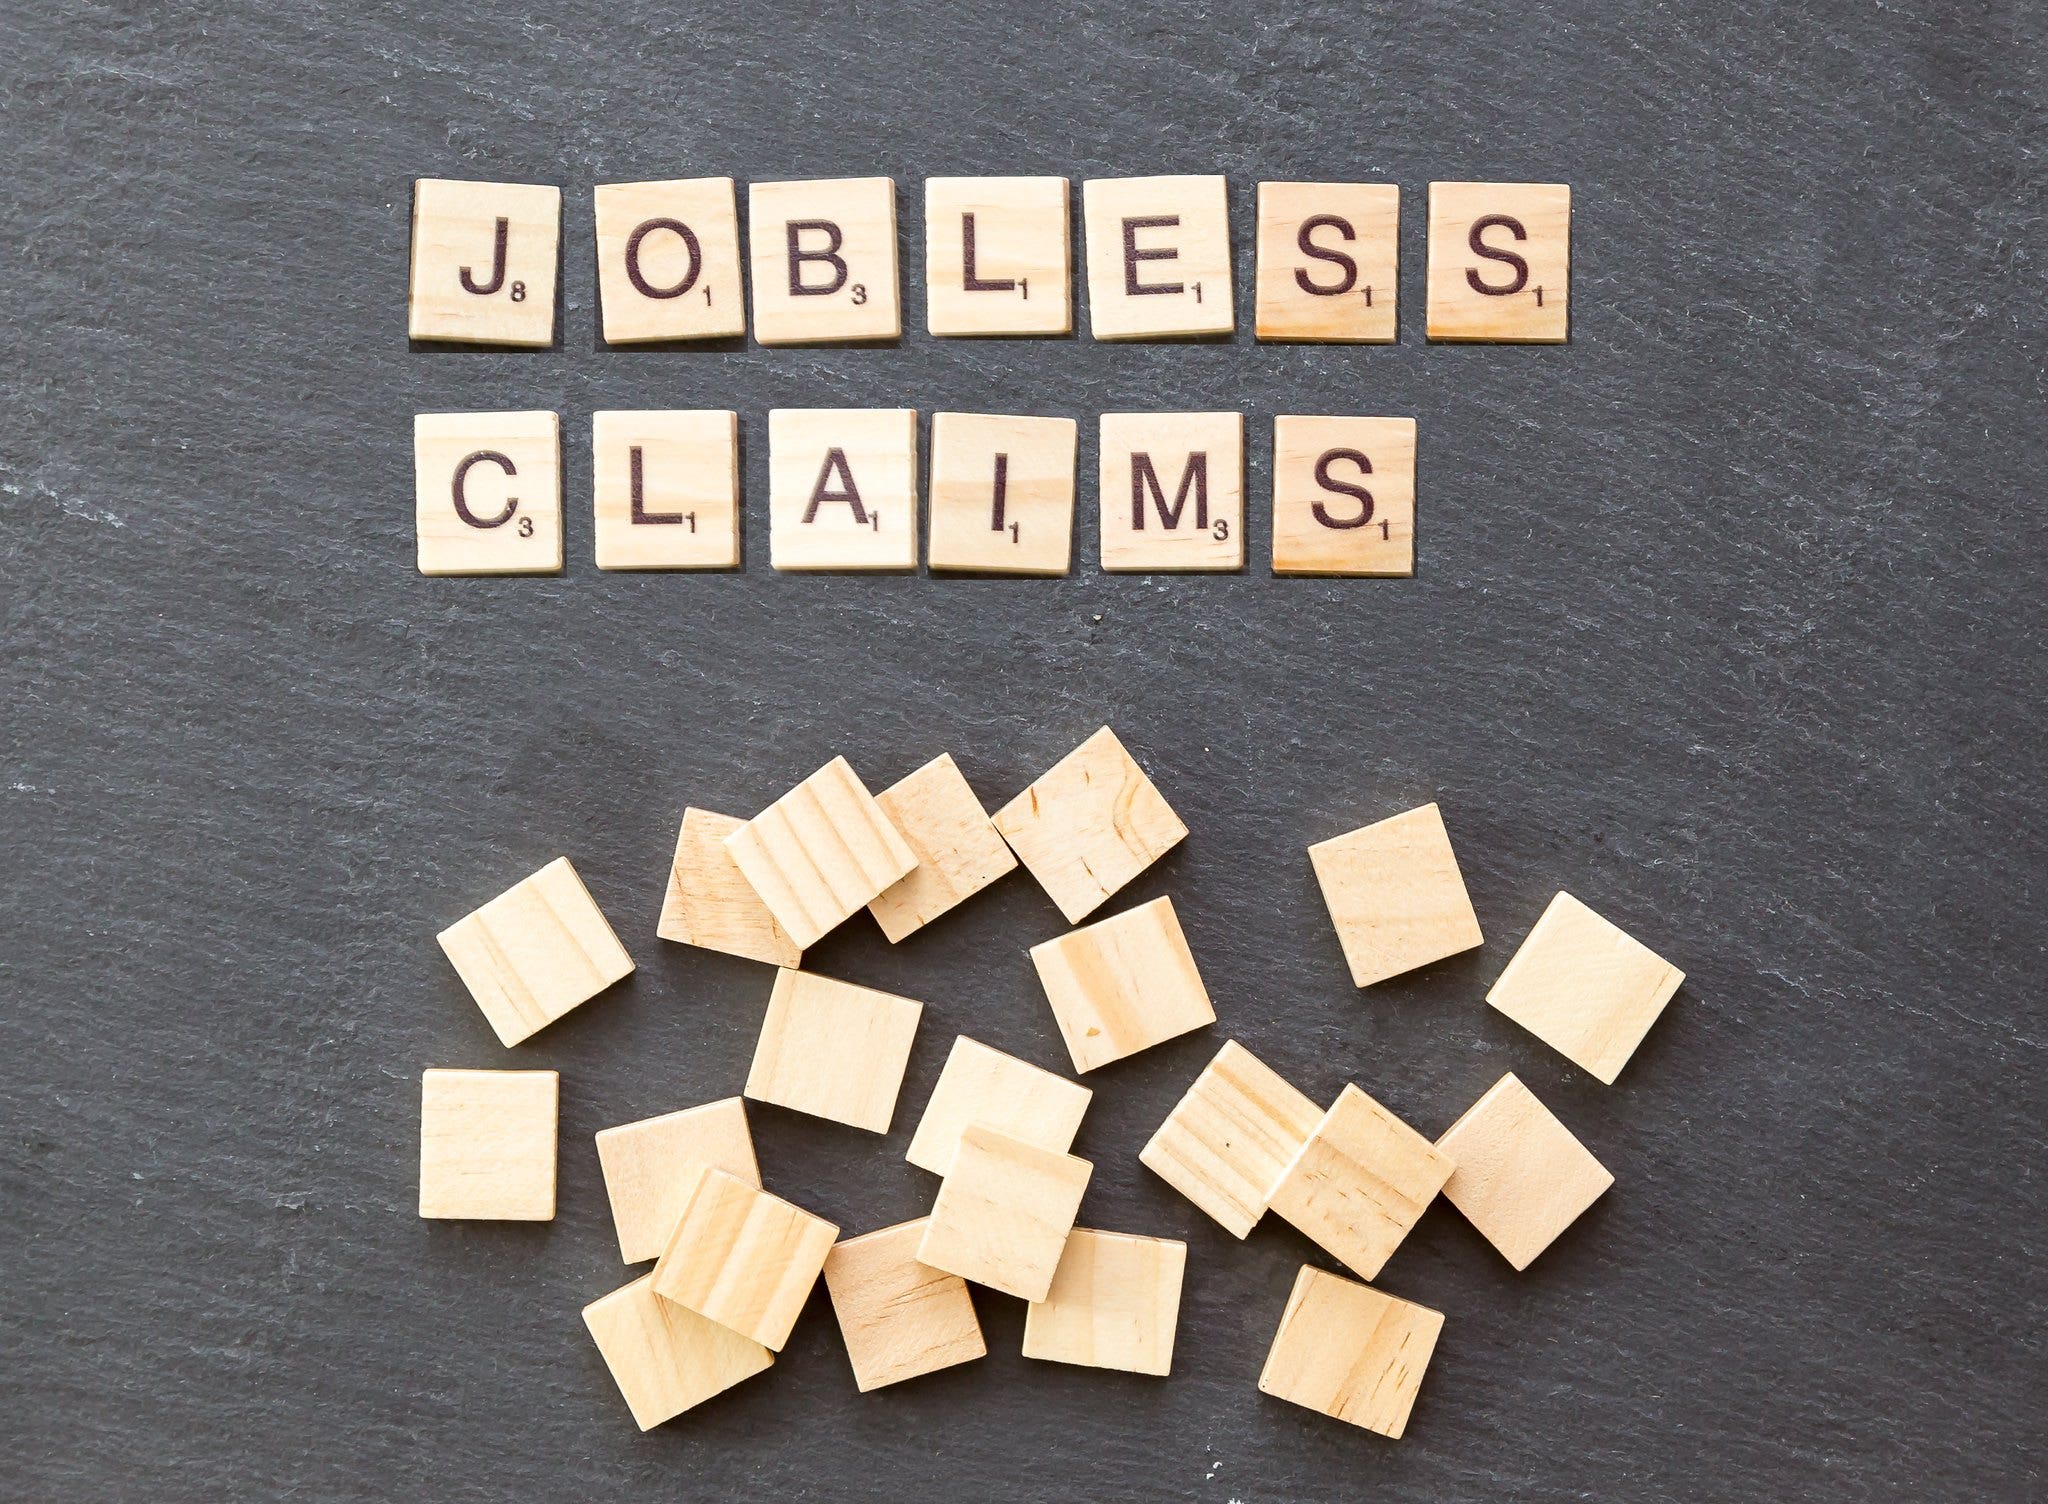 US Jobless Claims Make Unexpected Move Lower: What You Need To Know